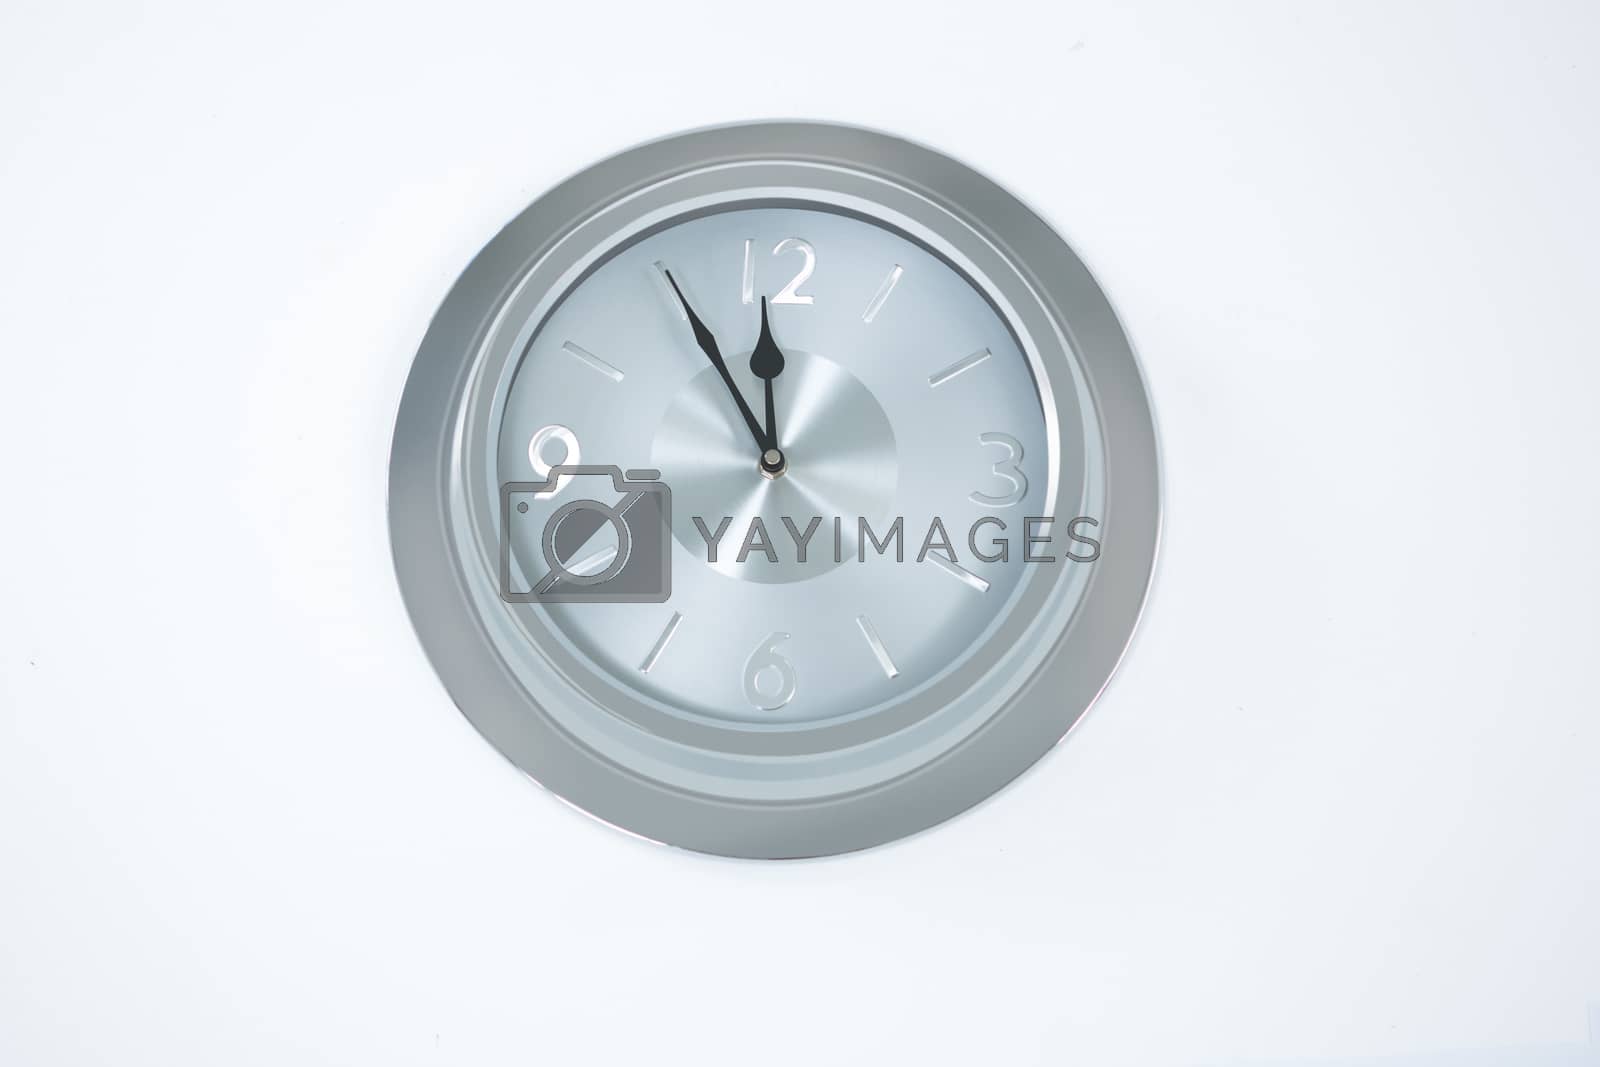 Royalty free image of Image of countdown to midnight on clock by Wavebreakmedia